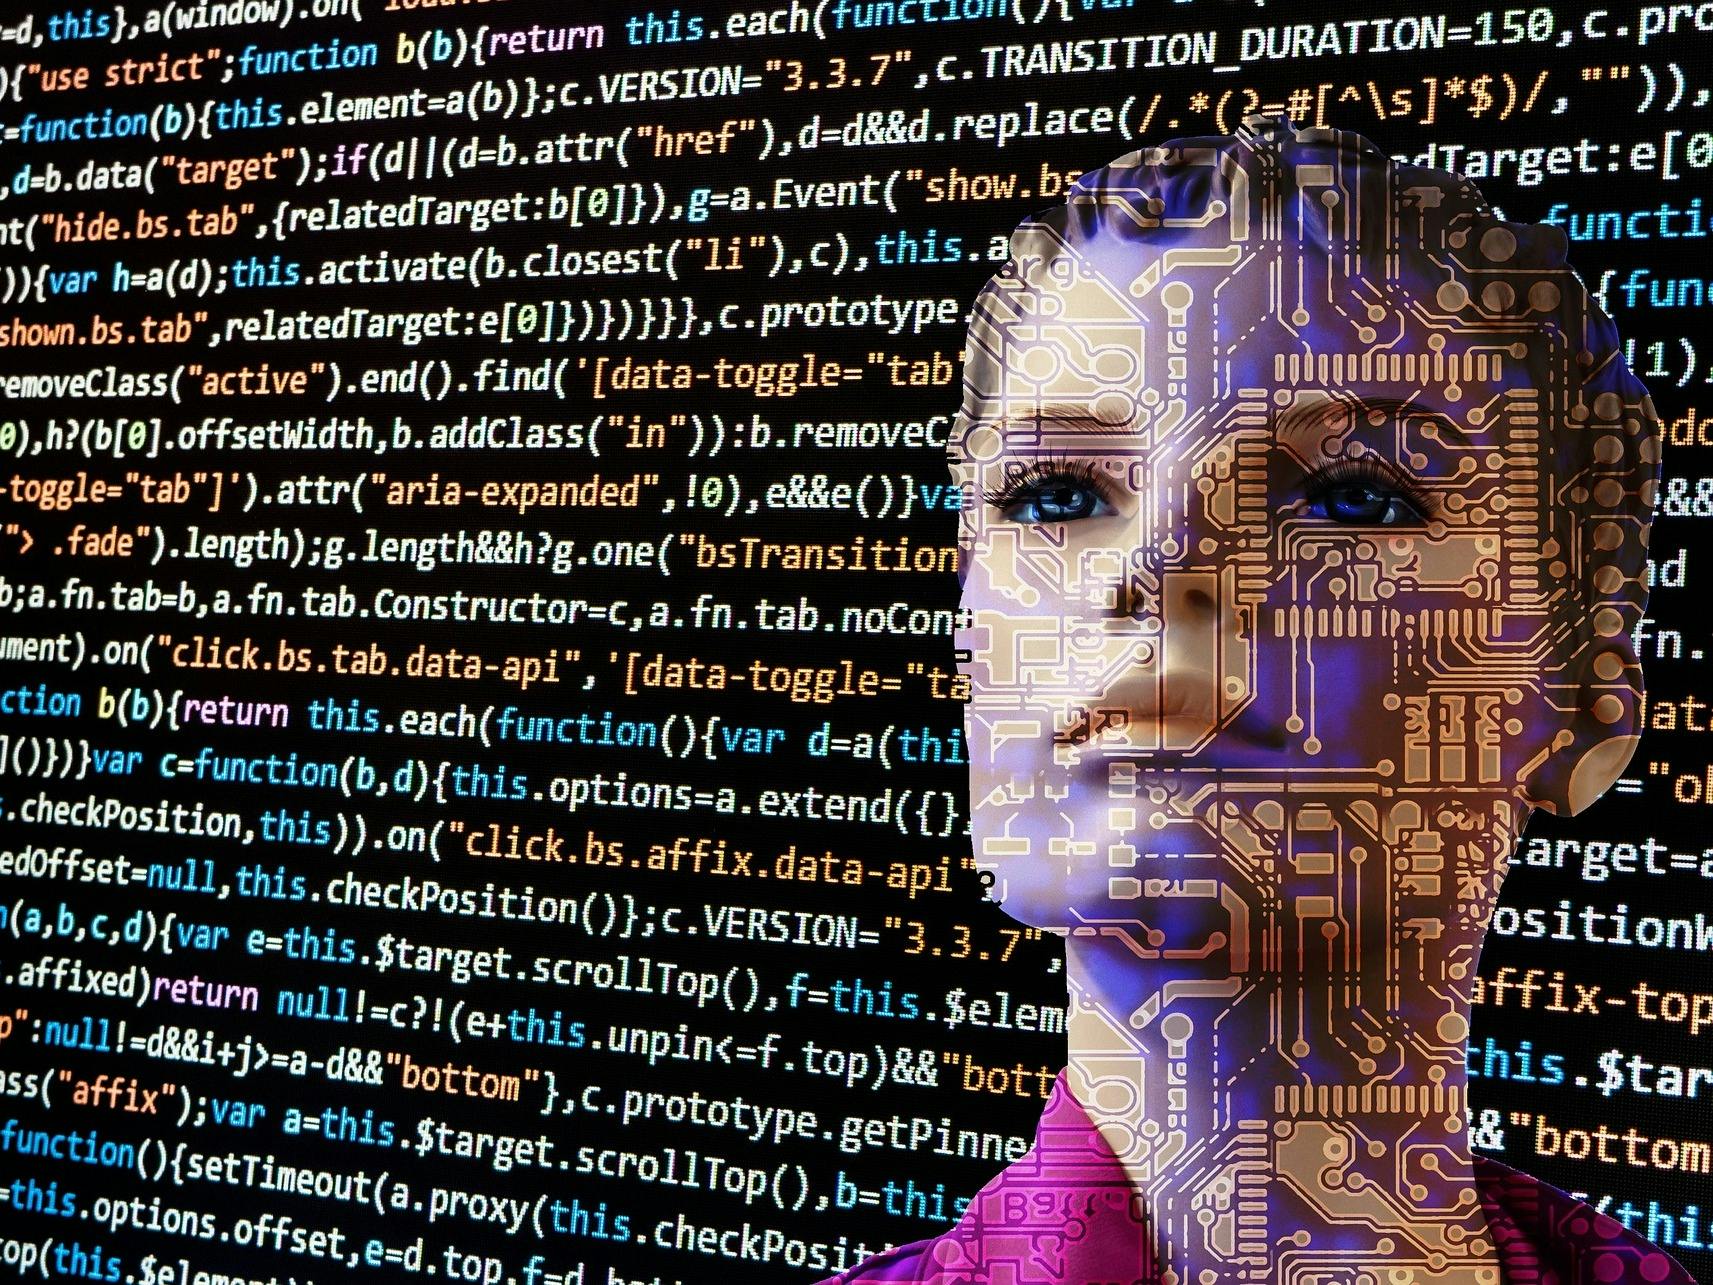 Careers in Artificial Intelligence (AI) & Machine Learning (ML)